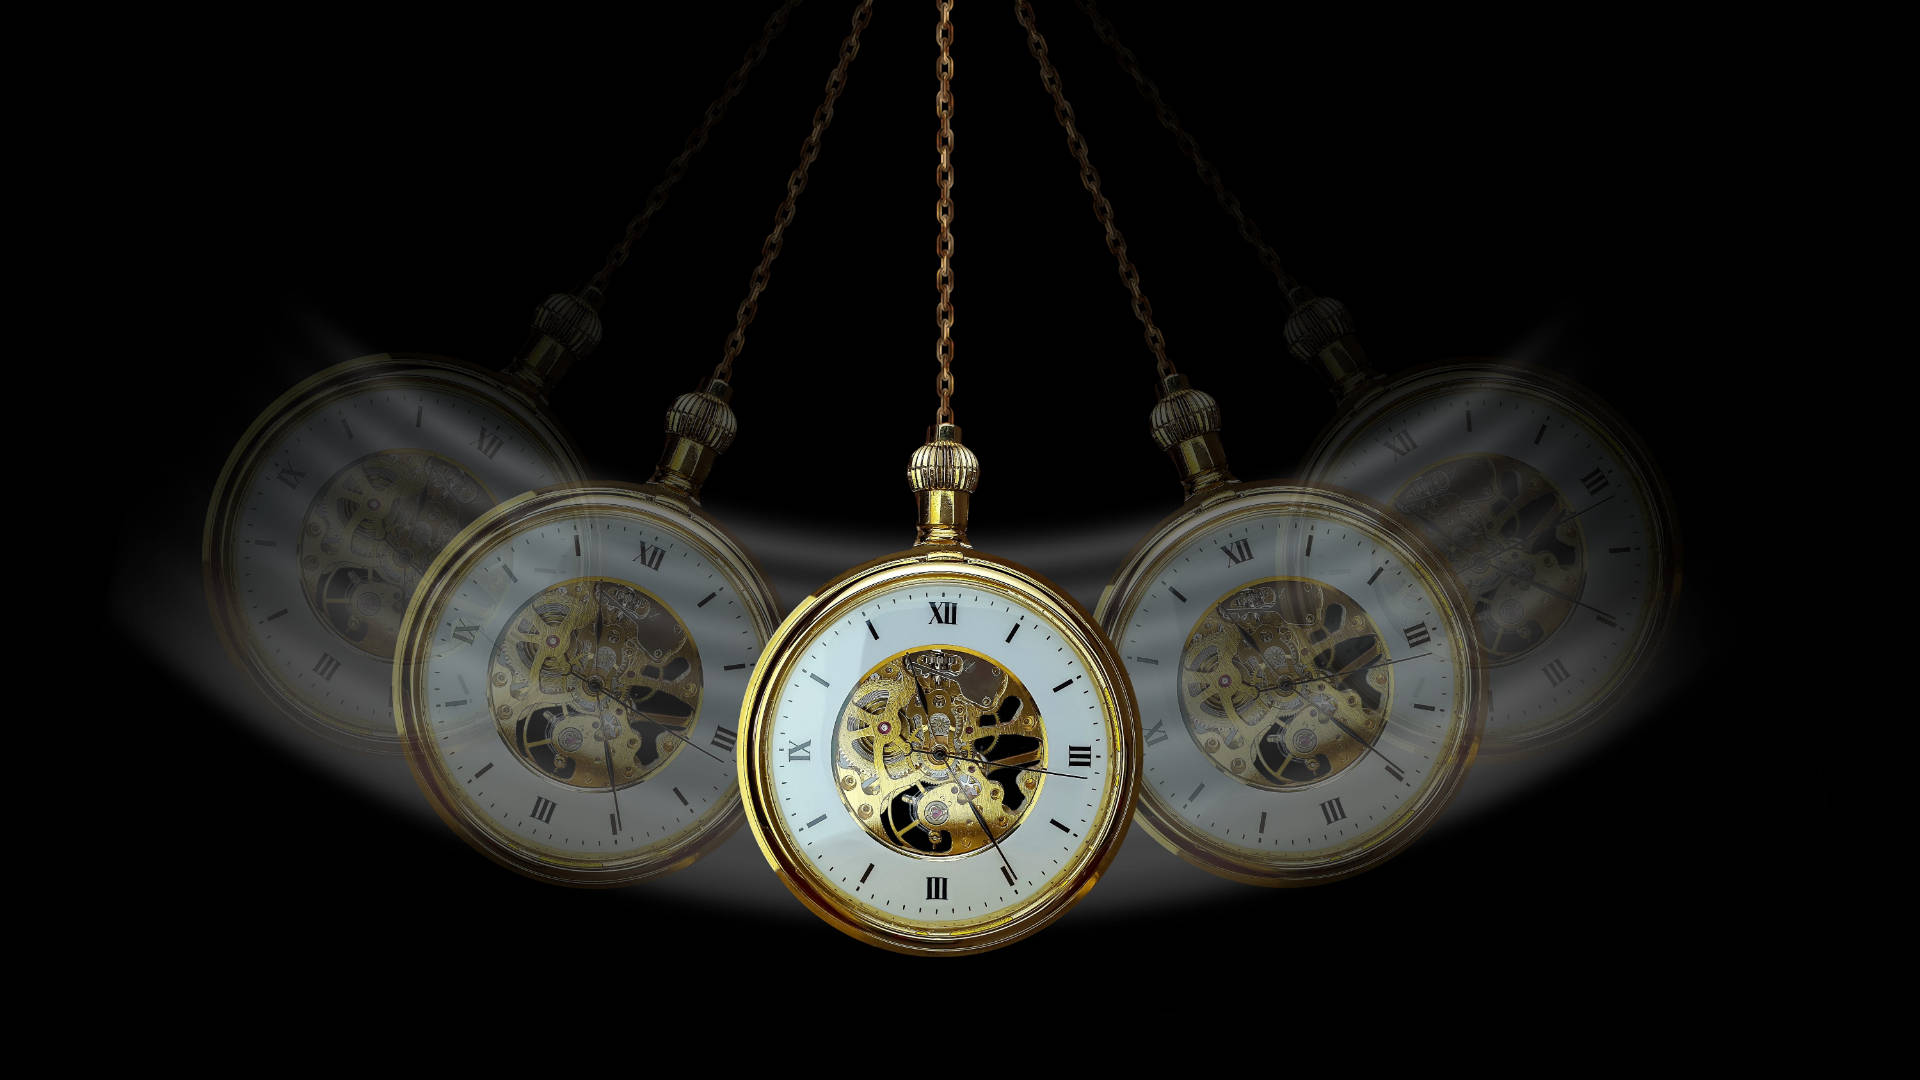 Captivating Shot of a swinging Pocket Watch against a backdrop signifying tempo or 'Tiempo' Wallpaper